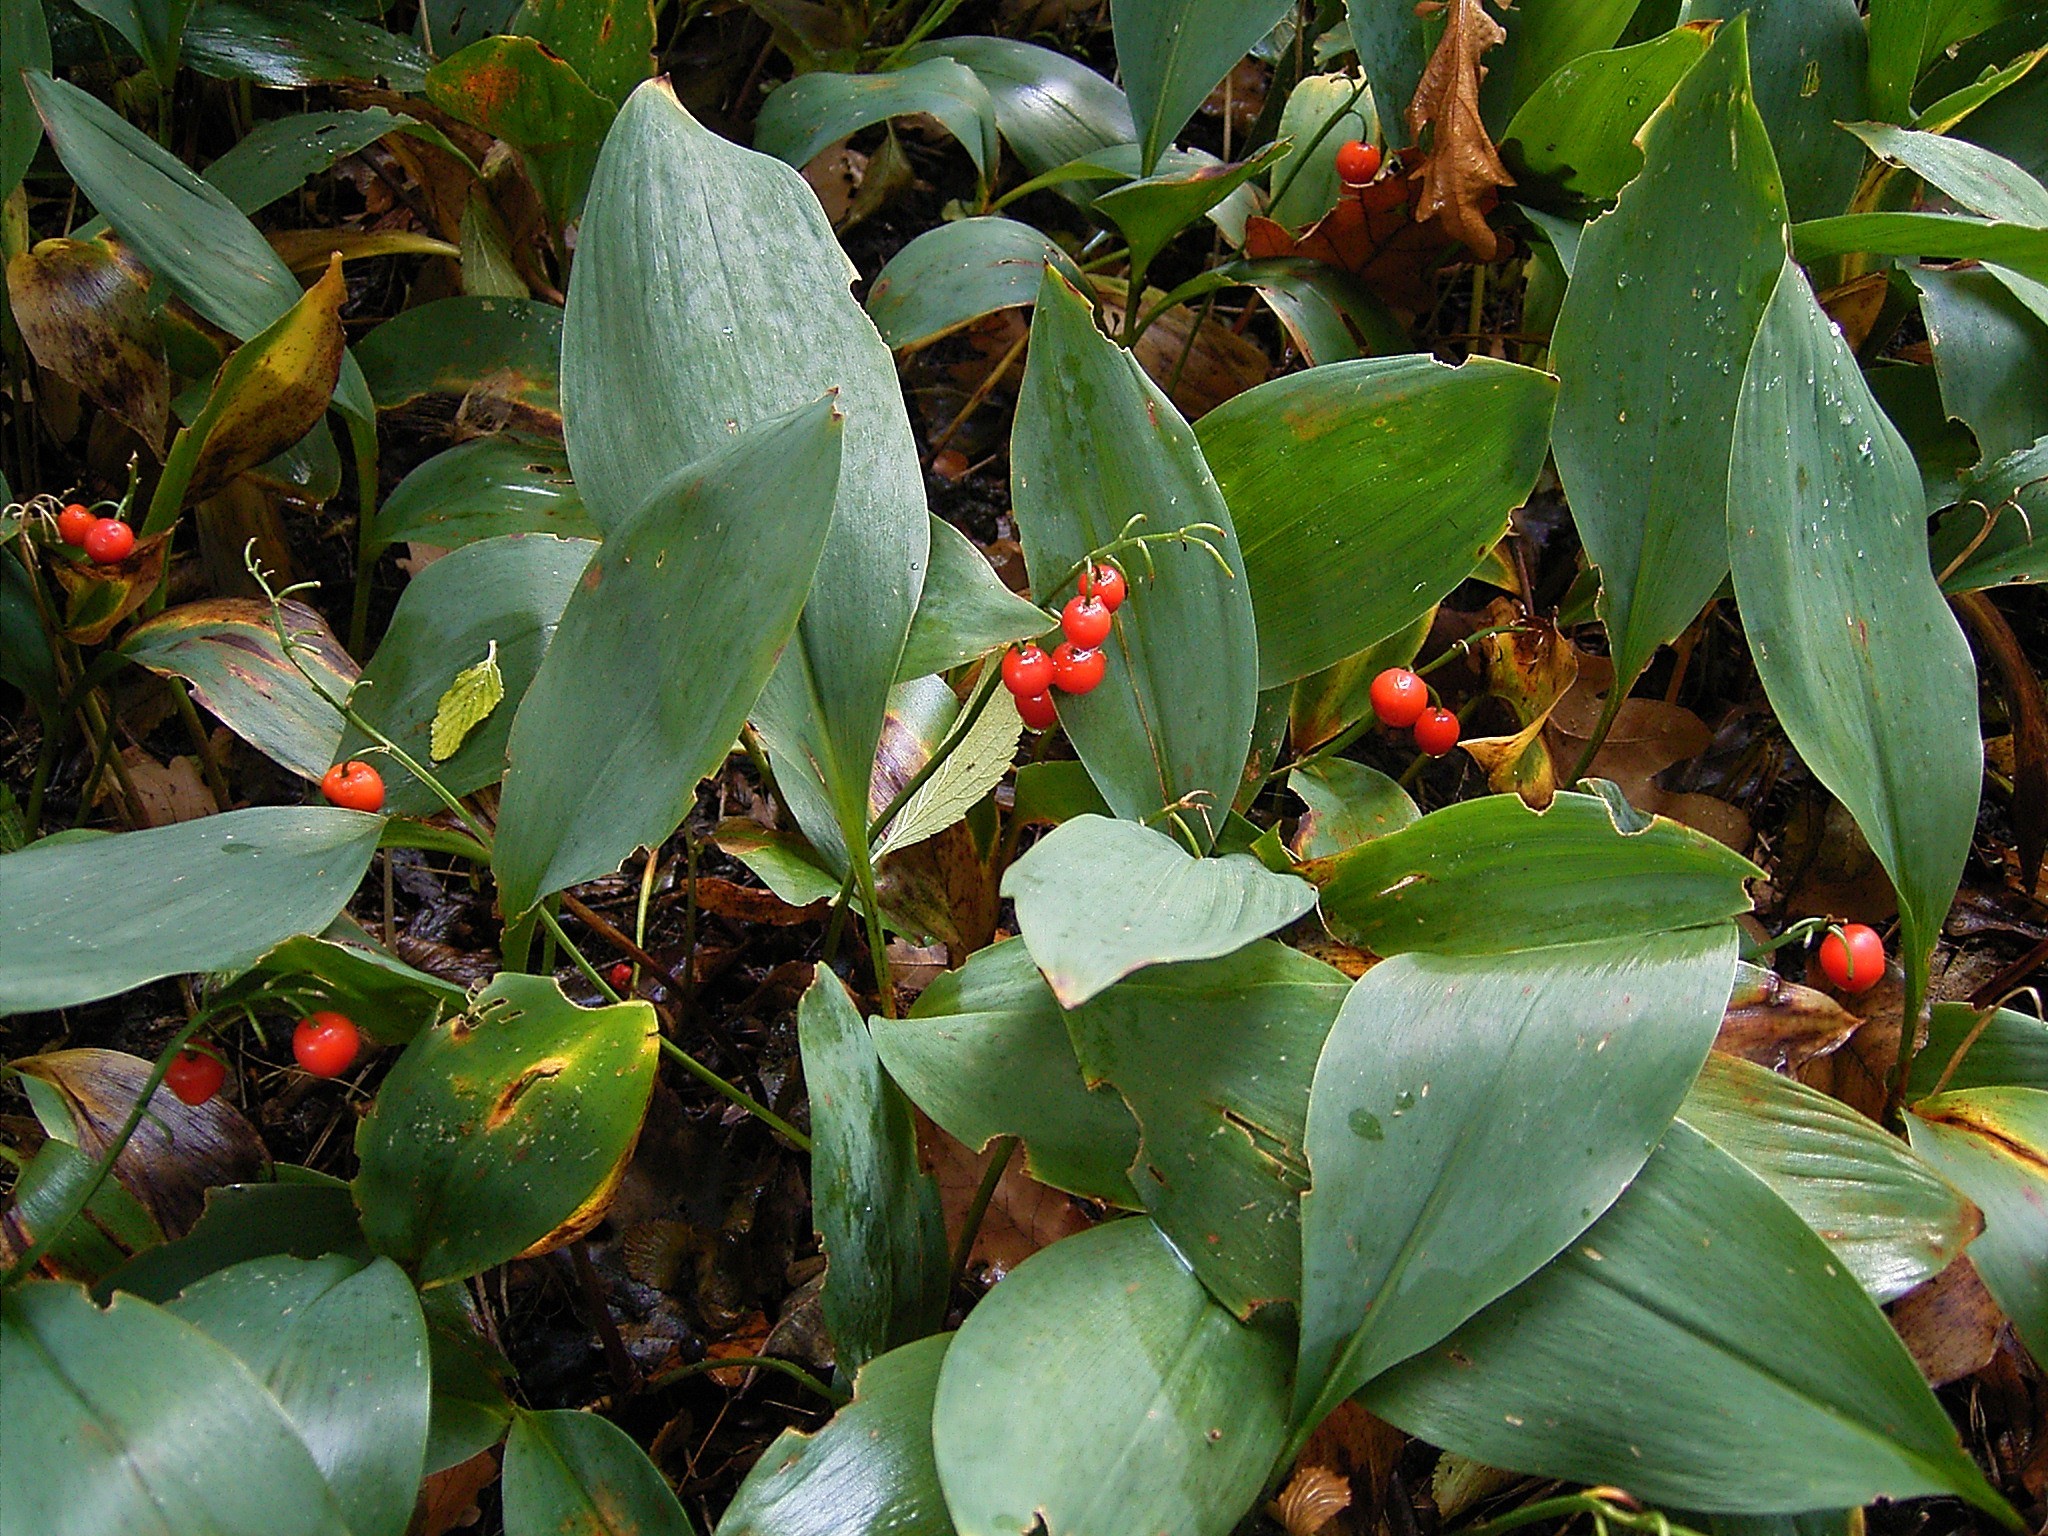 Many Lily of the Valley Berries. Frank Vincentz, Wikimedia Commons, 2007.